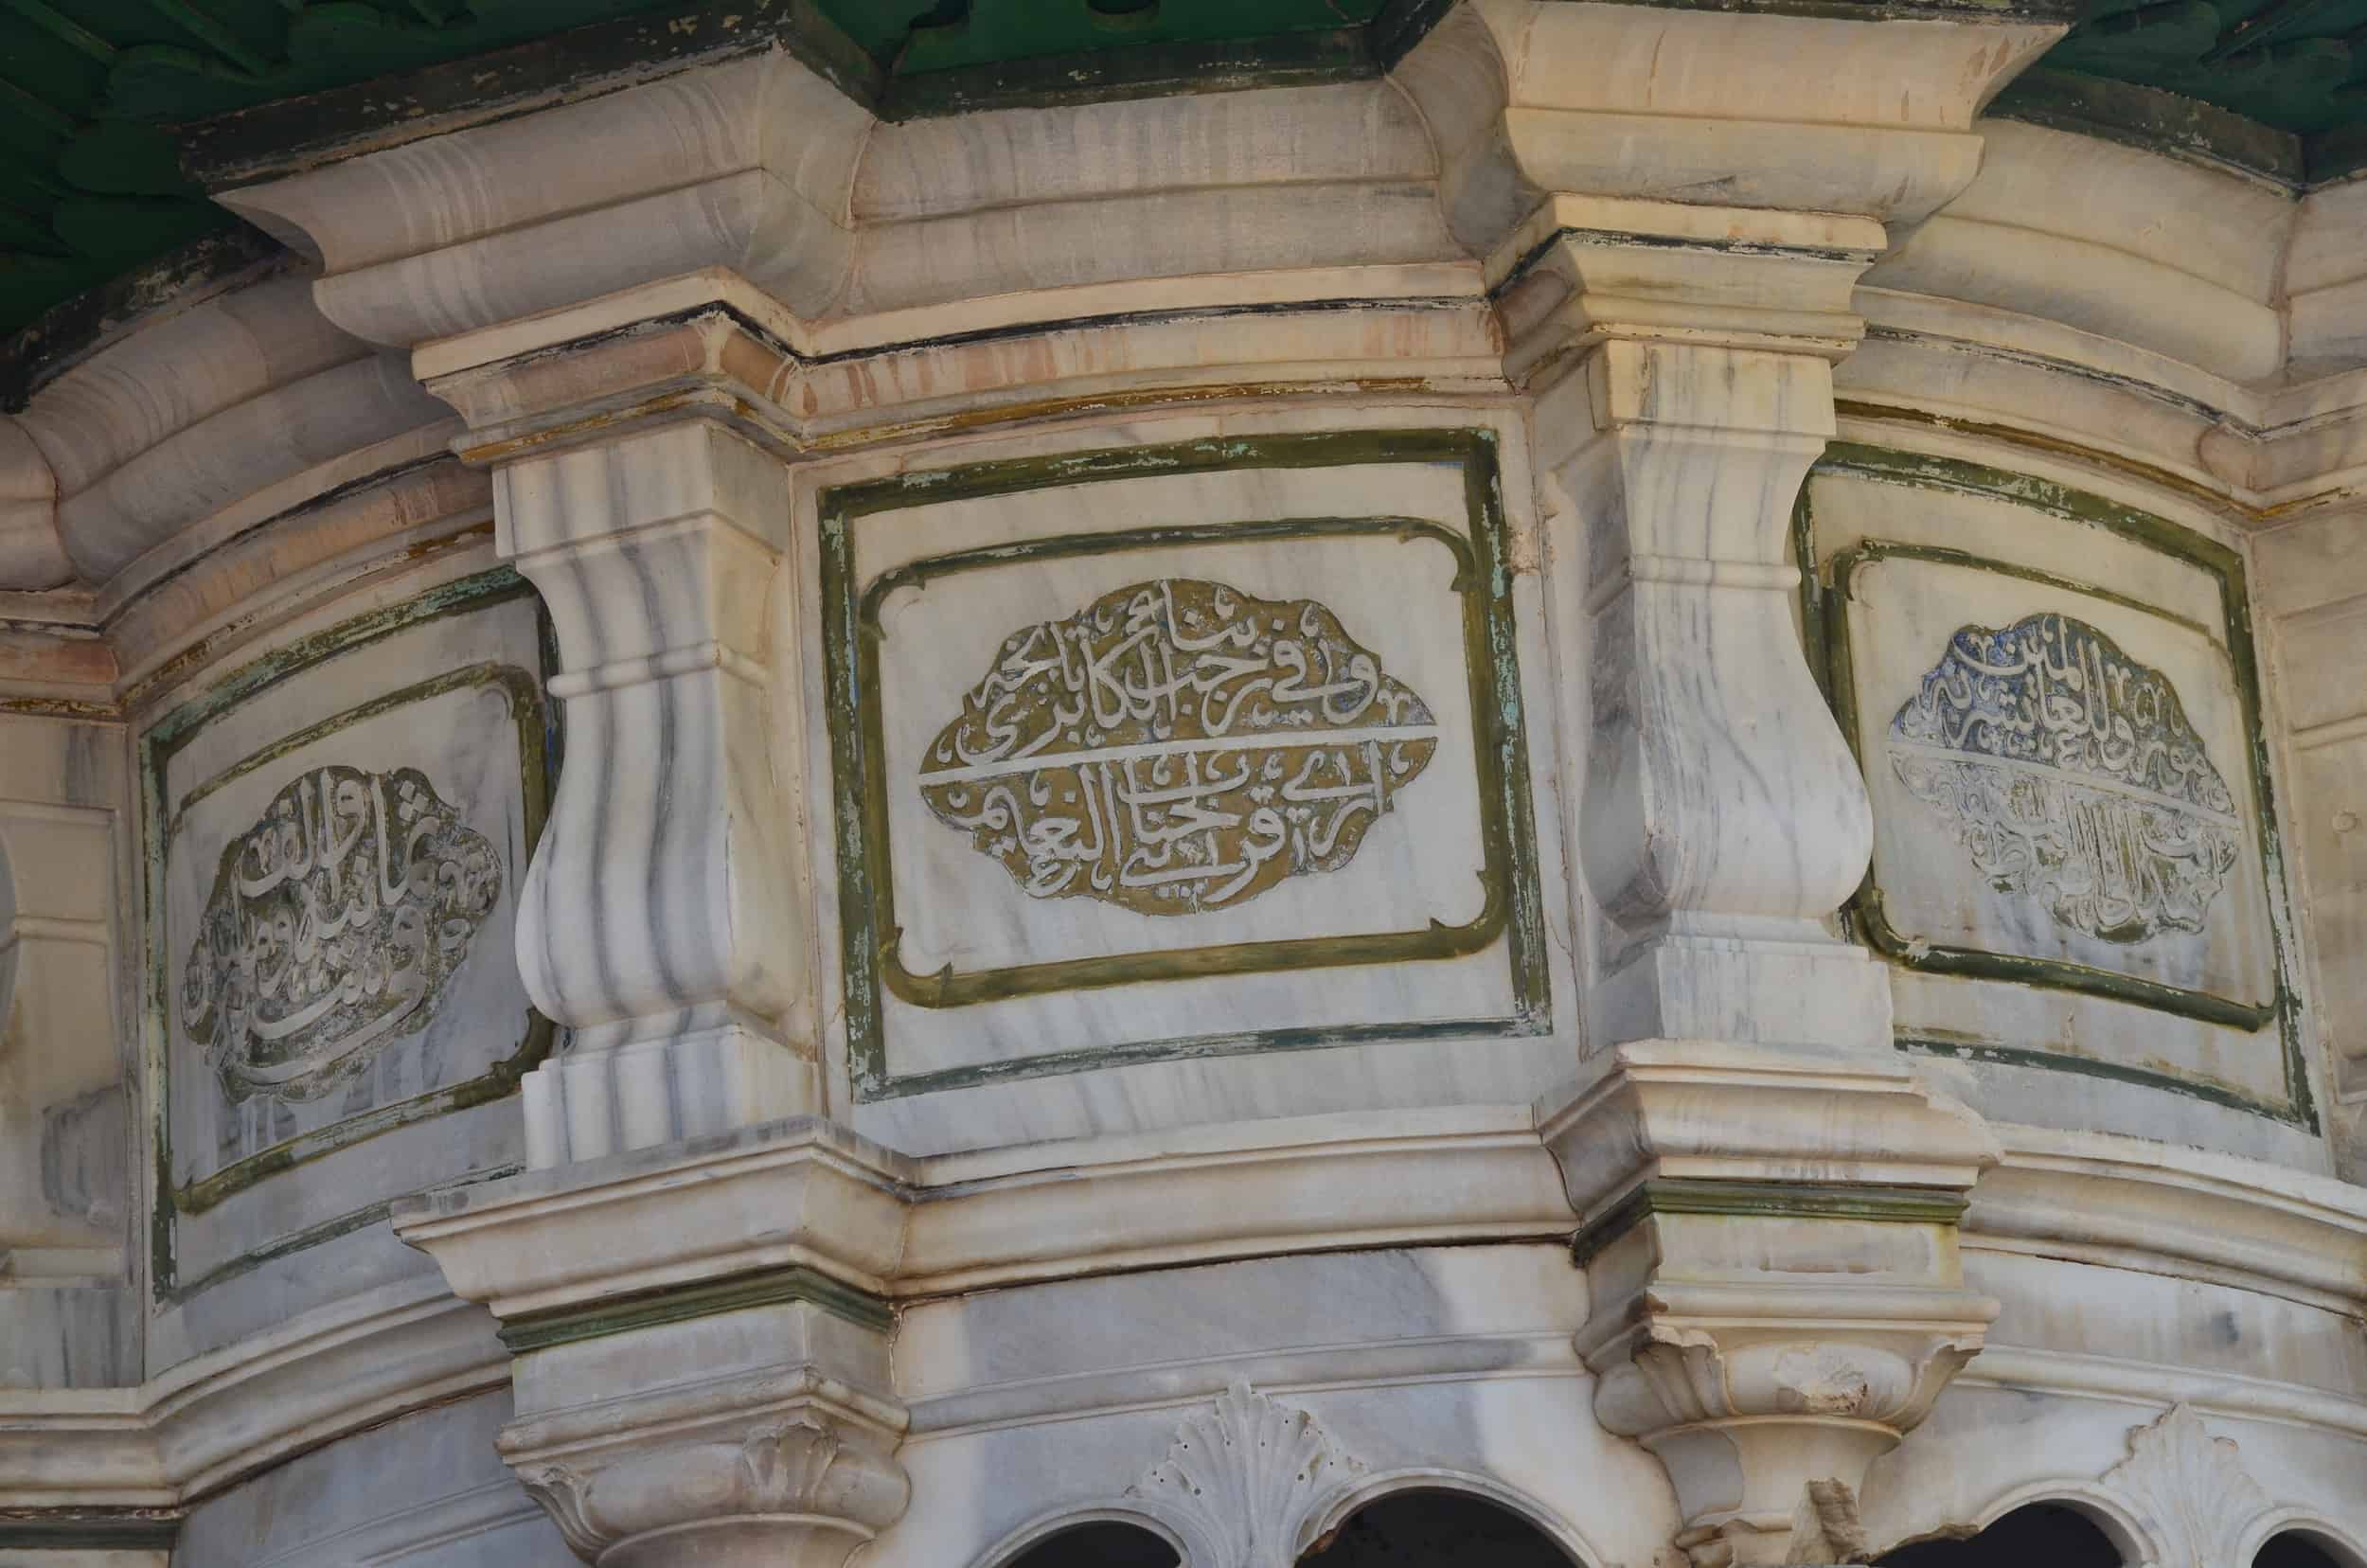 Inscriptions on the fountain outside the al-Jazzar Mosque in Acre, Israel